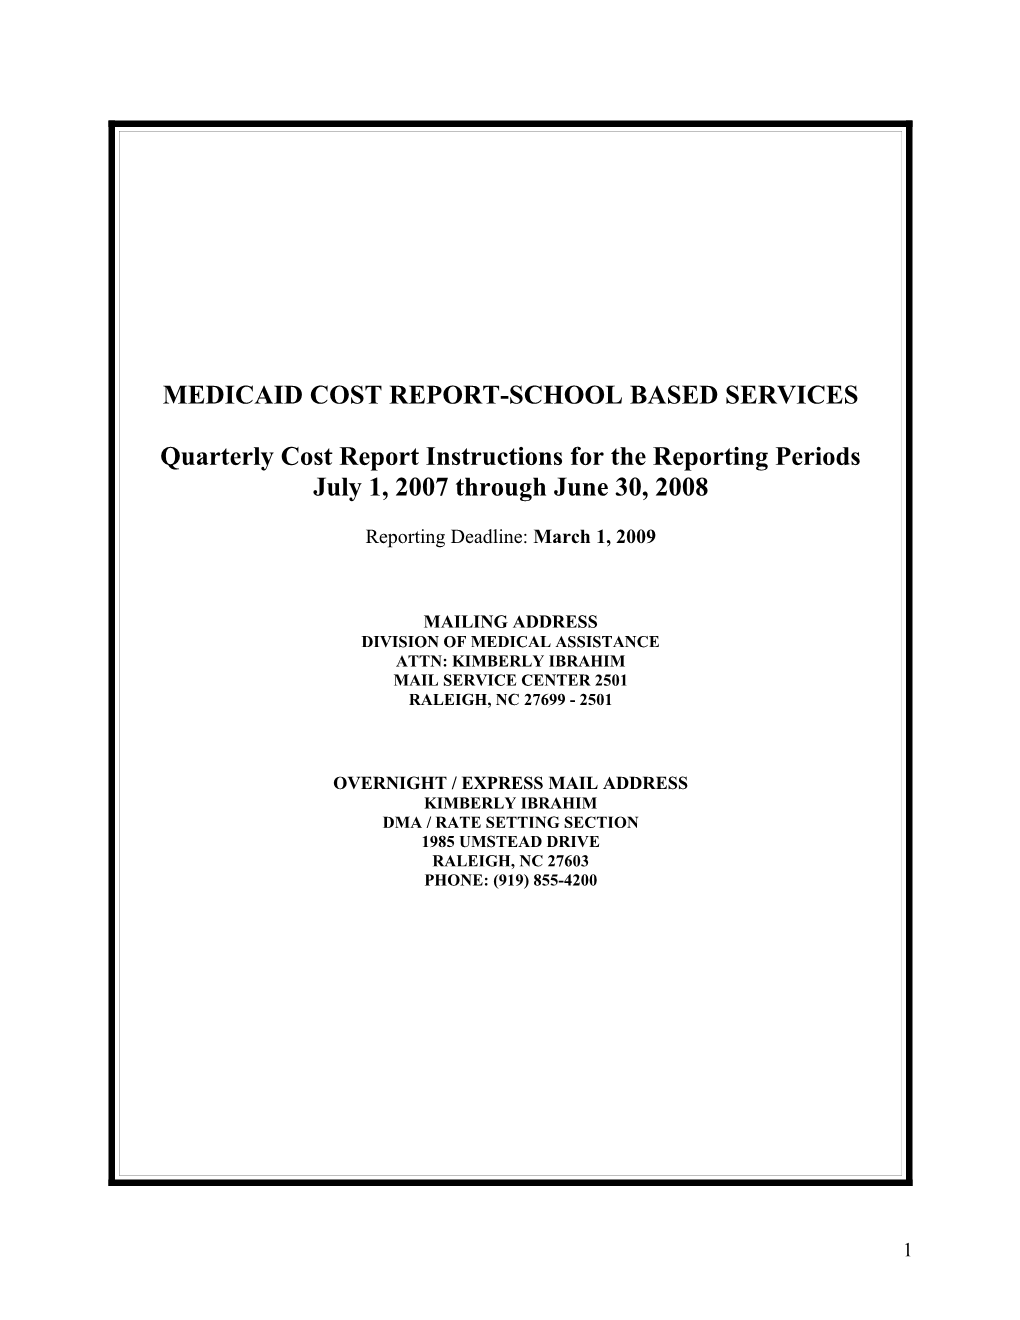 Medicaid Cost Report-School Based Services